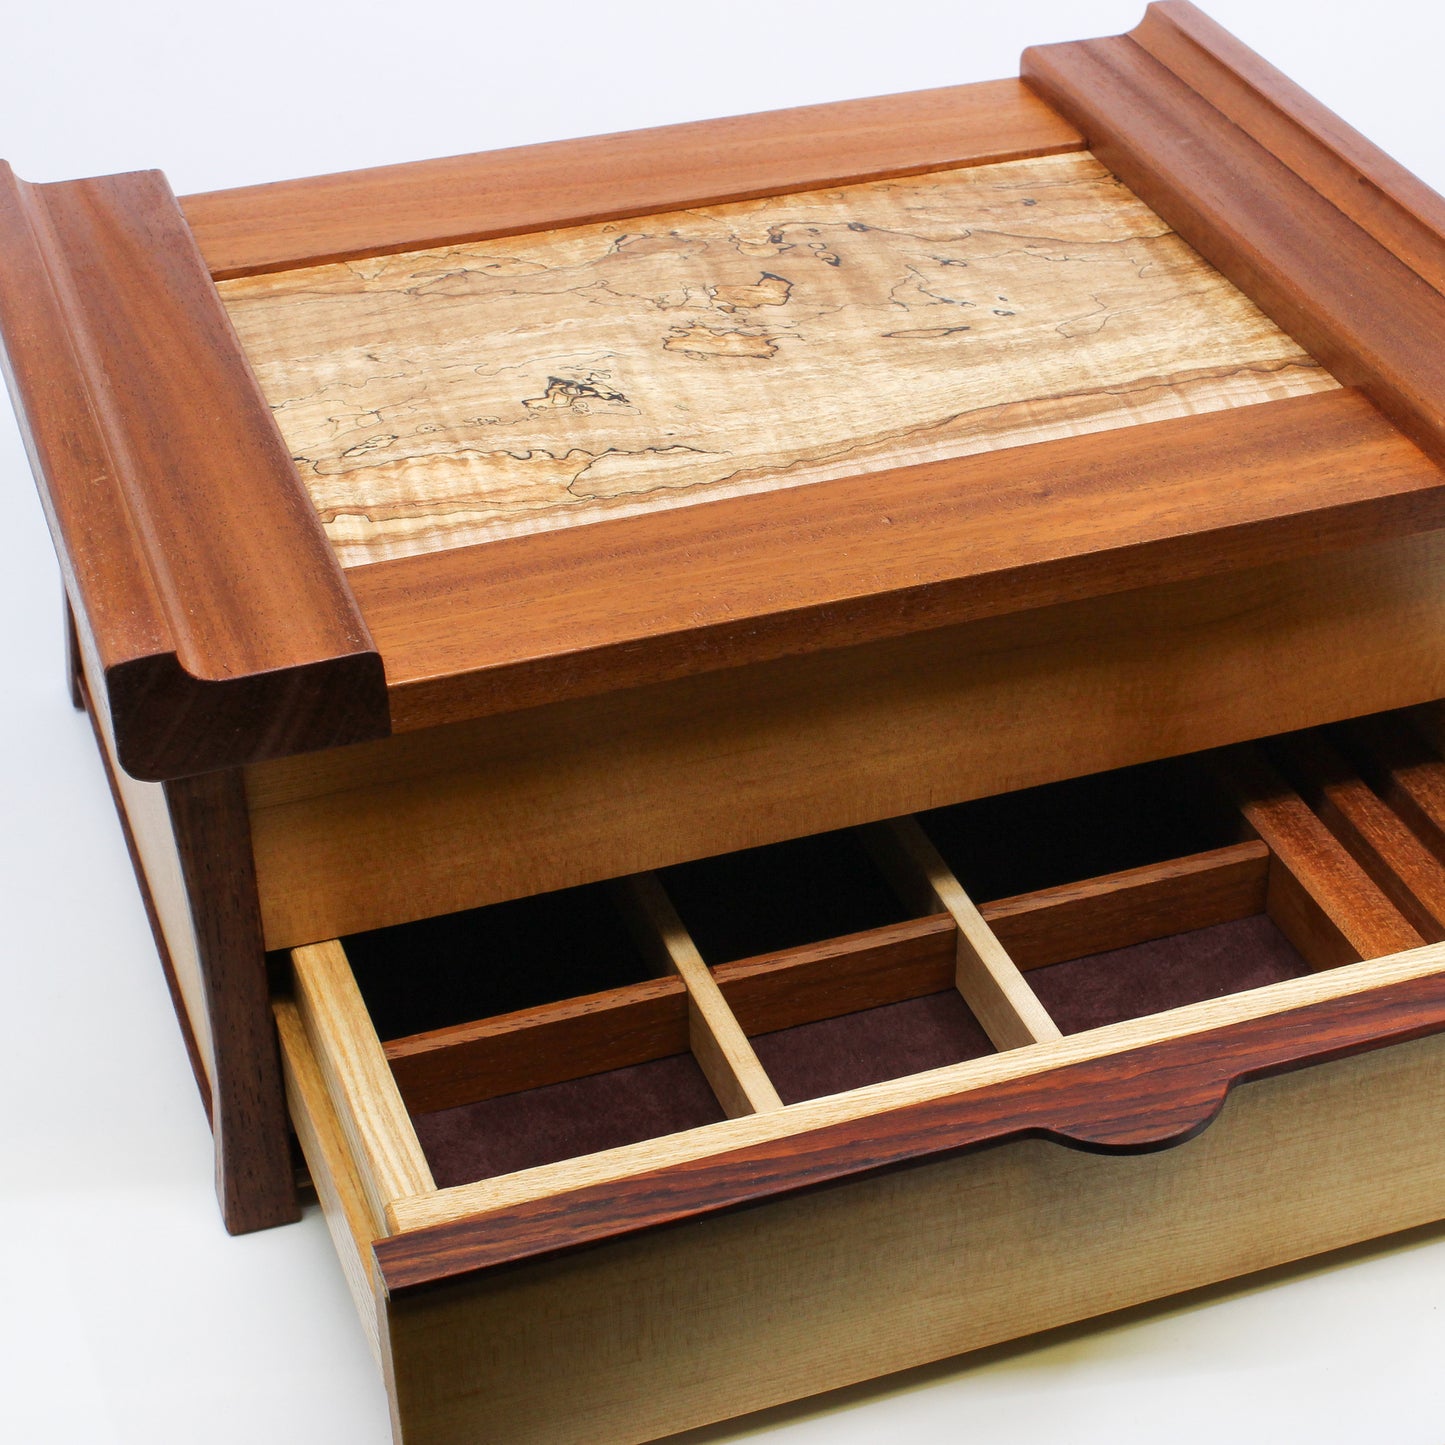 Open drawer with six compartments